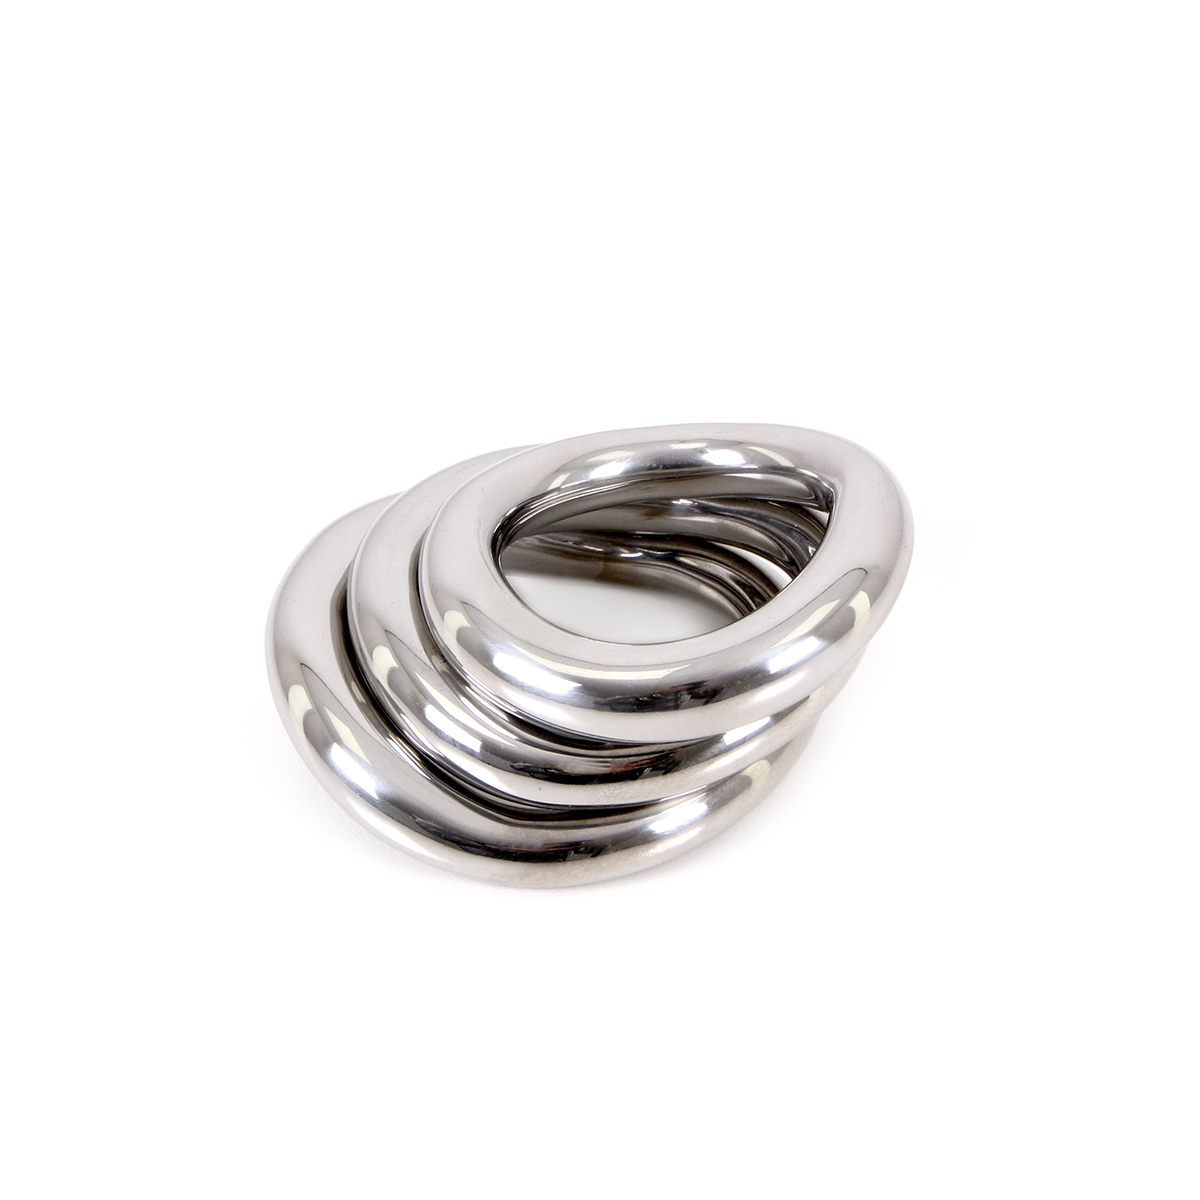 Costum-Fit-Cockring-40-mm-OPR-277044-5